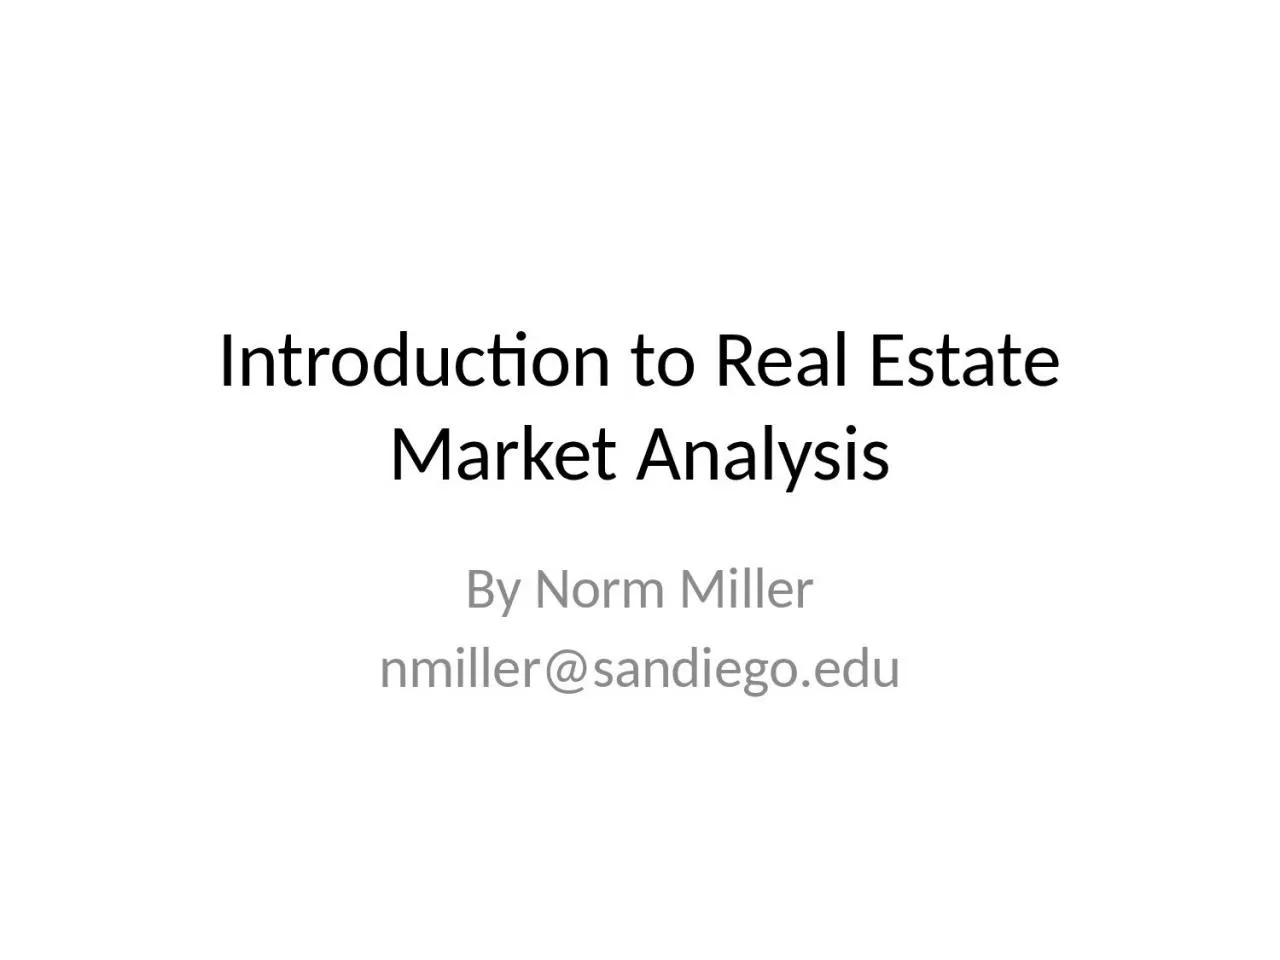 Introduction to Real Estate Market Analysis